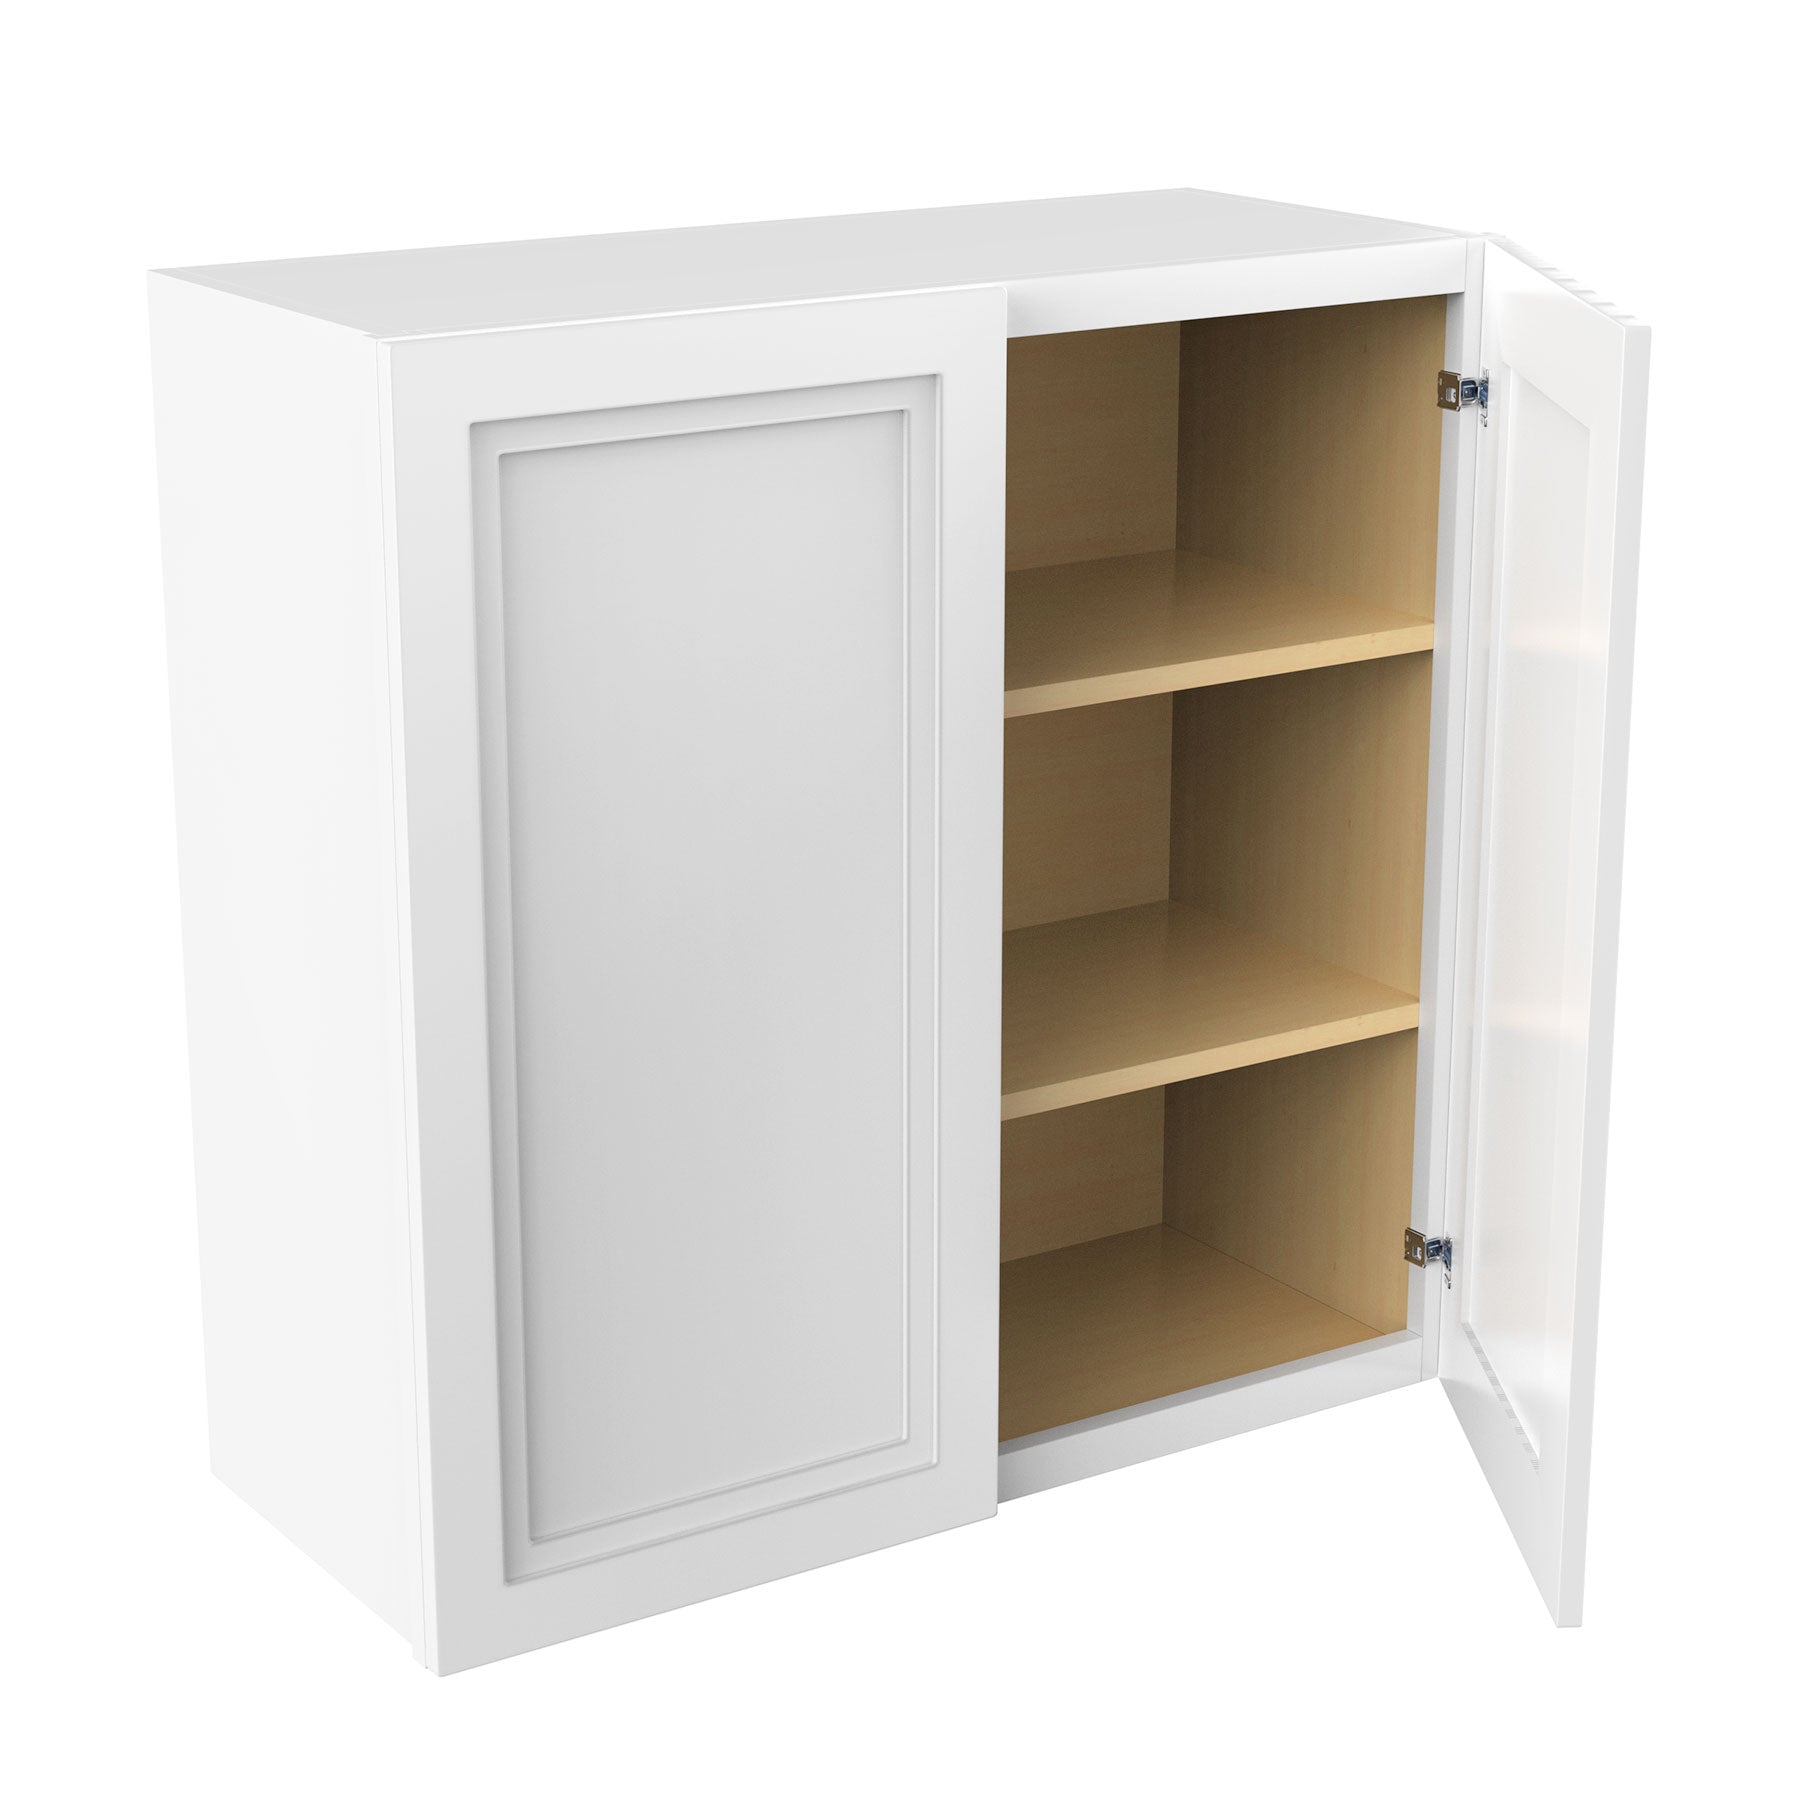 Fashion White - Double Door Wall Cabinet | 30"W x 30"H x 12"D